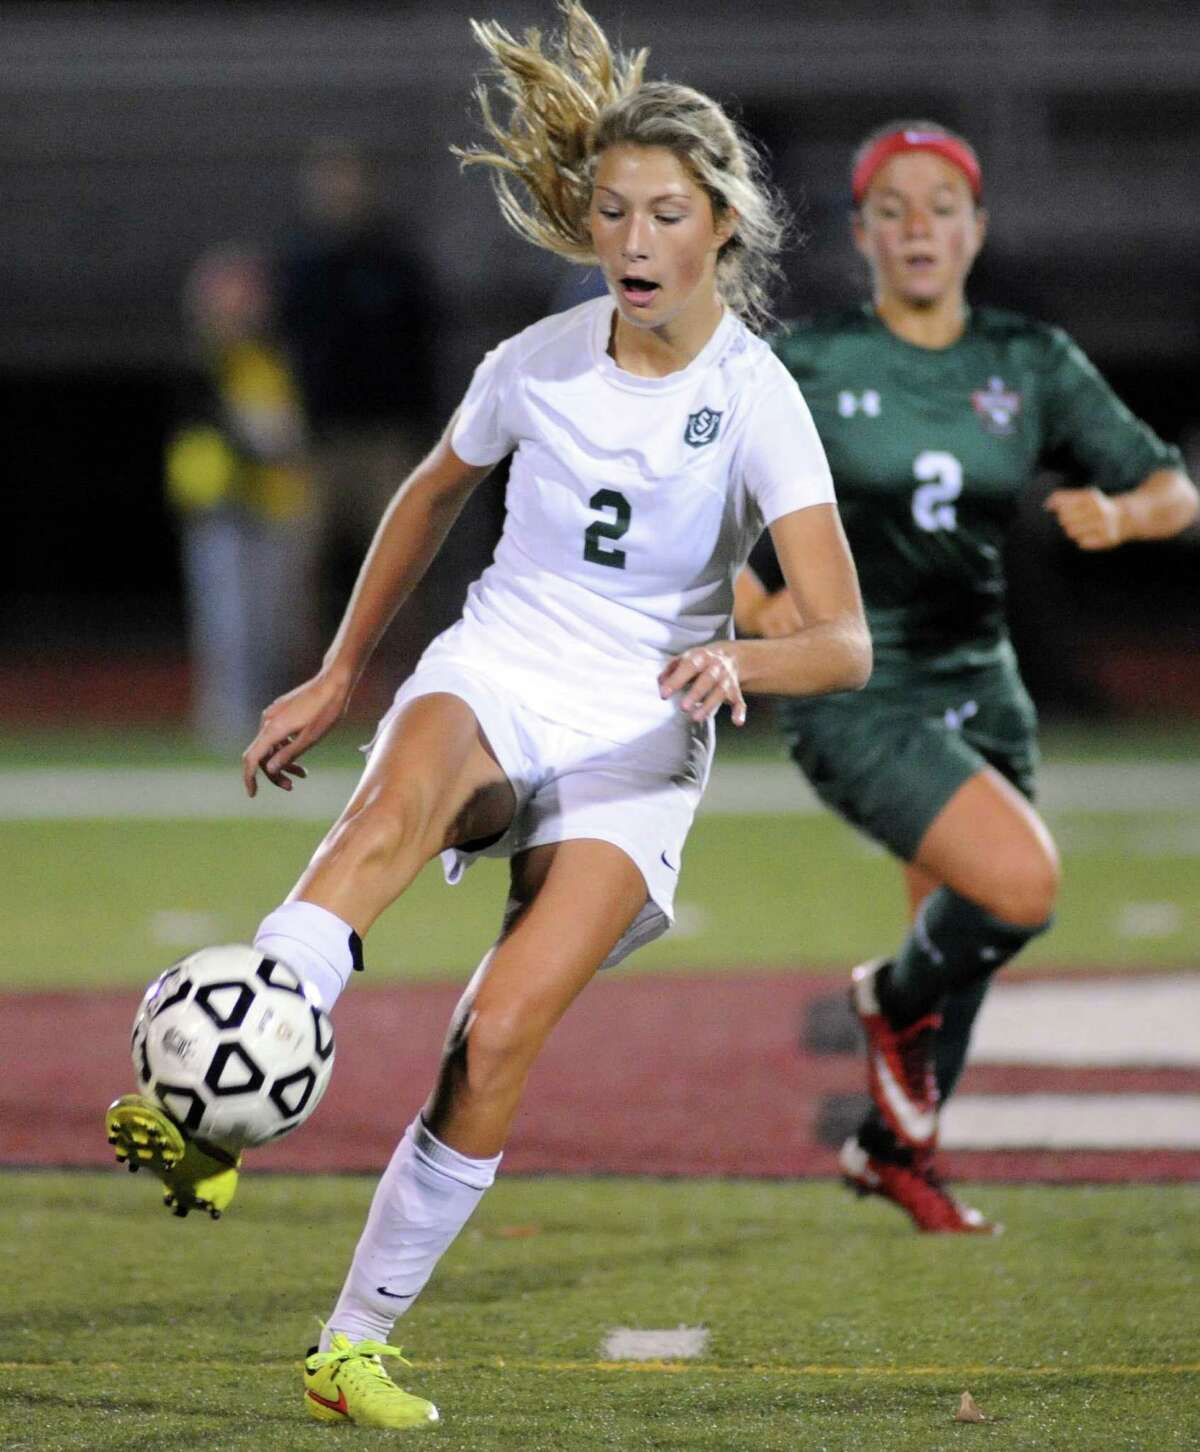 Schalmont's Sydnee Metzold brings the ball down the field during their Class B girls' regional soccer game against Marcellus on Tuesday Nov. 3, 2015 in Stillwater, N.Y. Shalmont won the contest 2-1. (Michael P. Farrell/Times Union)